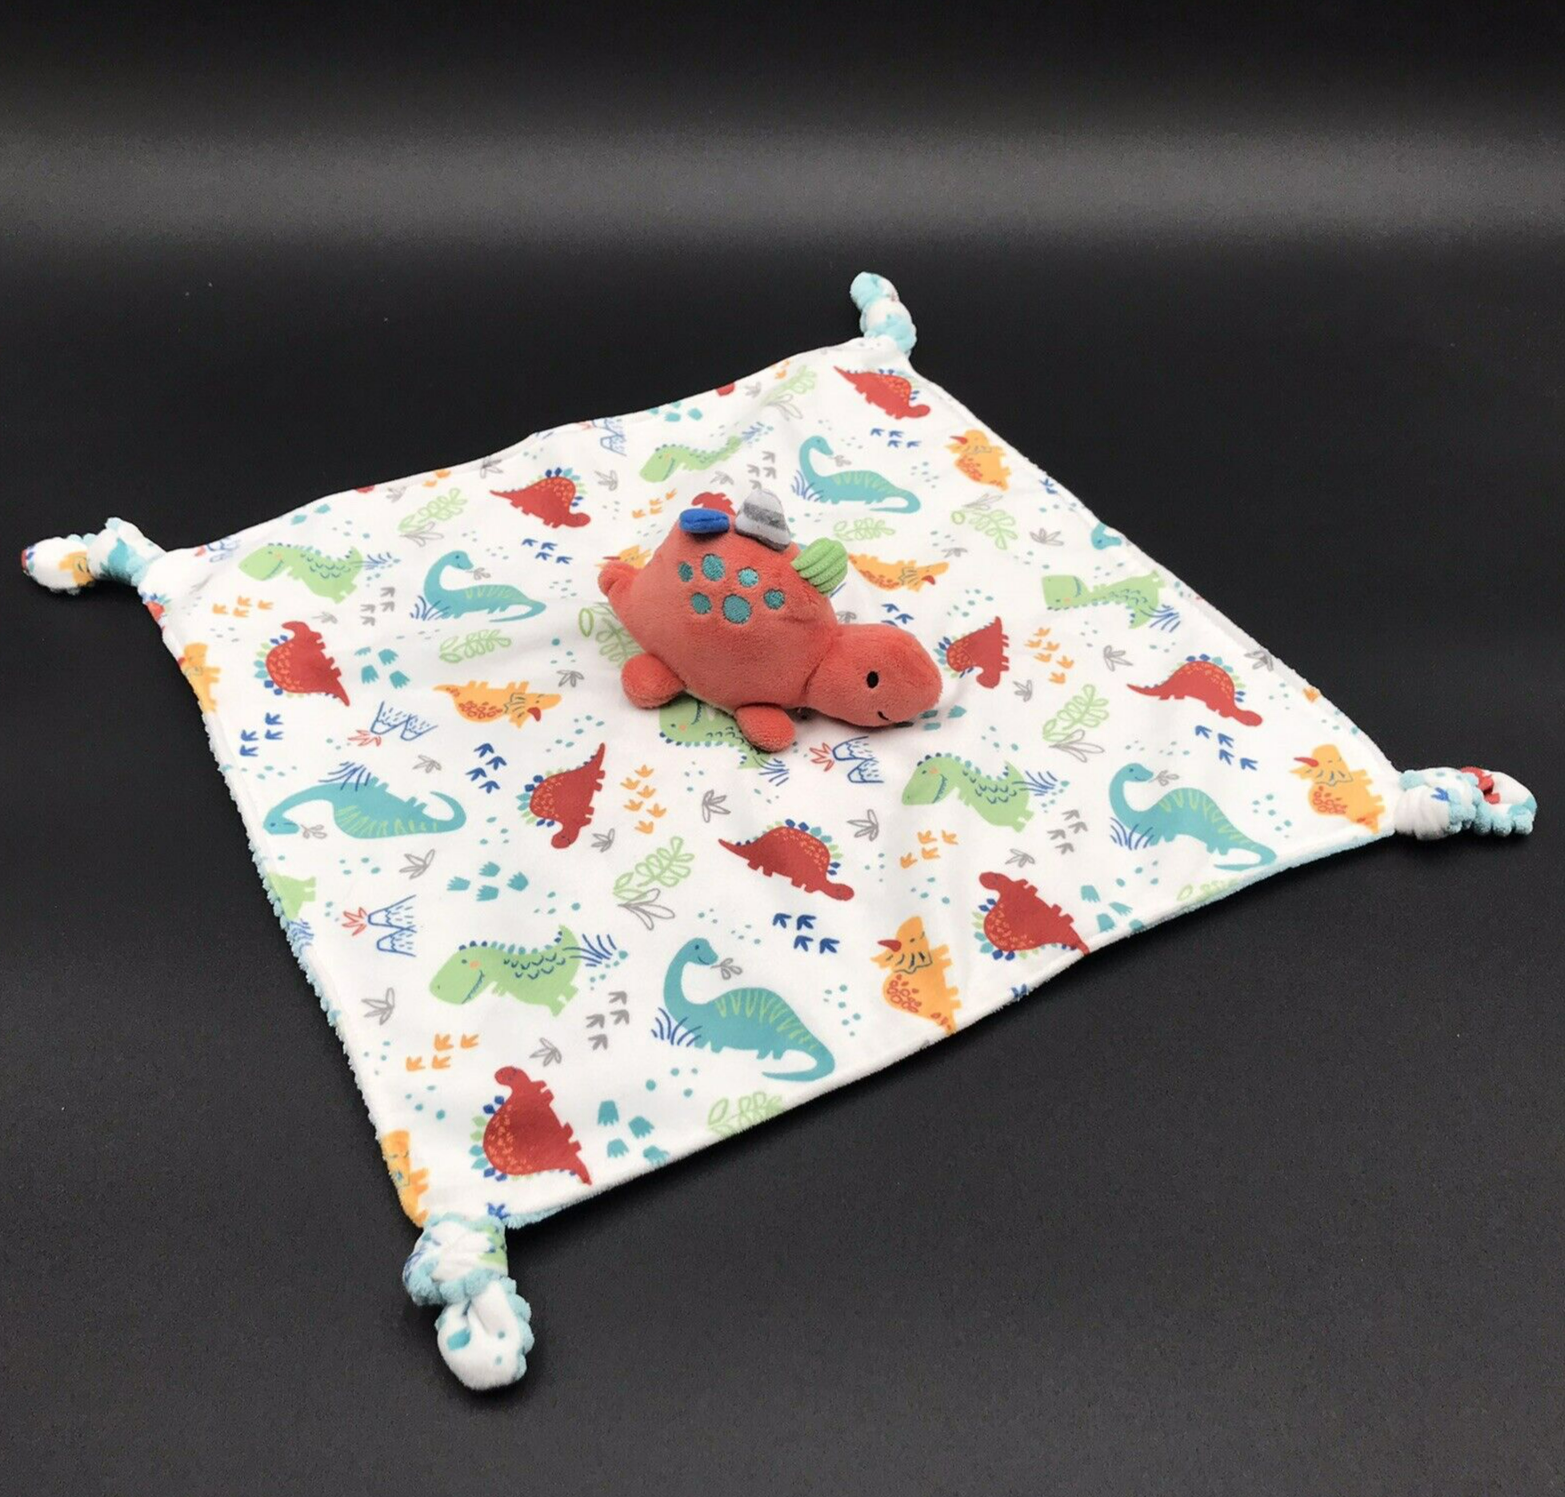 Primary image for Mary Meyer Lovey Dinosaur Security Blanket Soother Knotted Corners Pebblesaurus